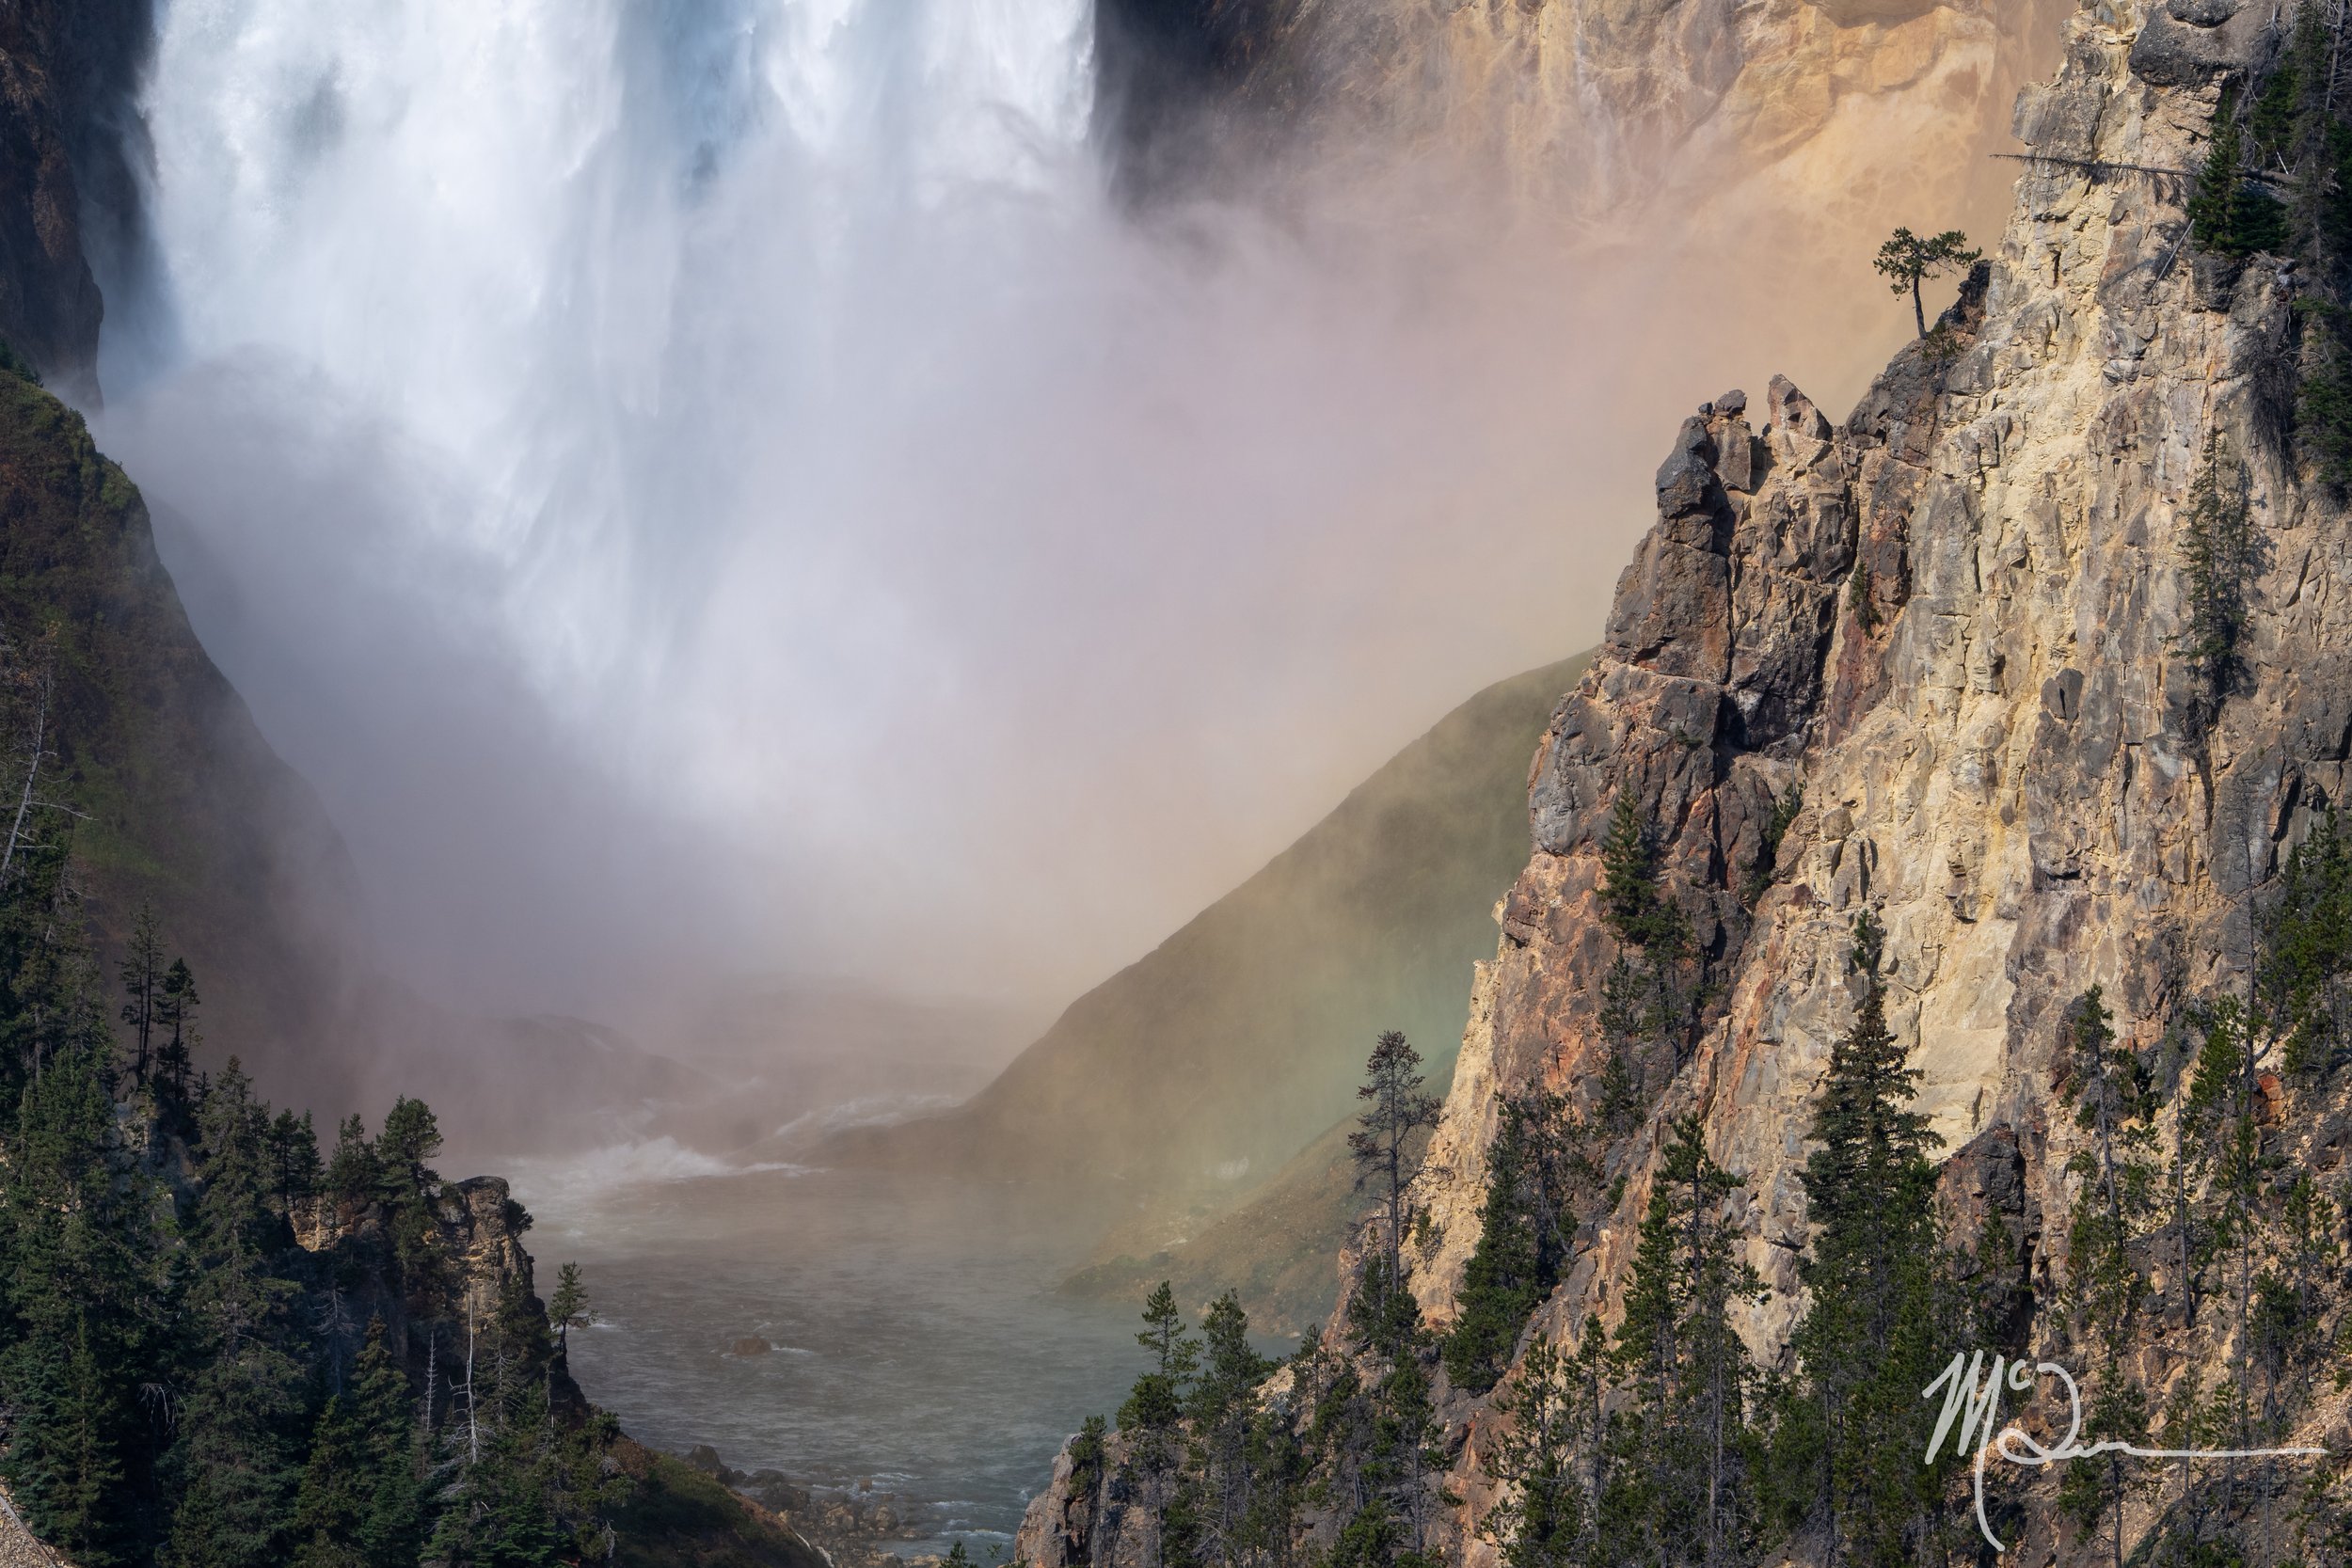 Lower Falls of Yellowstone River